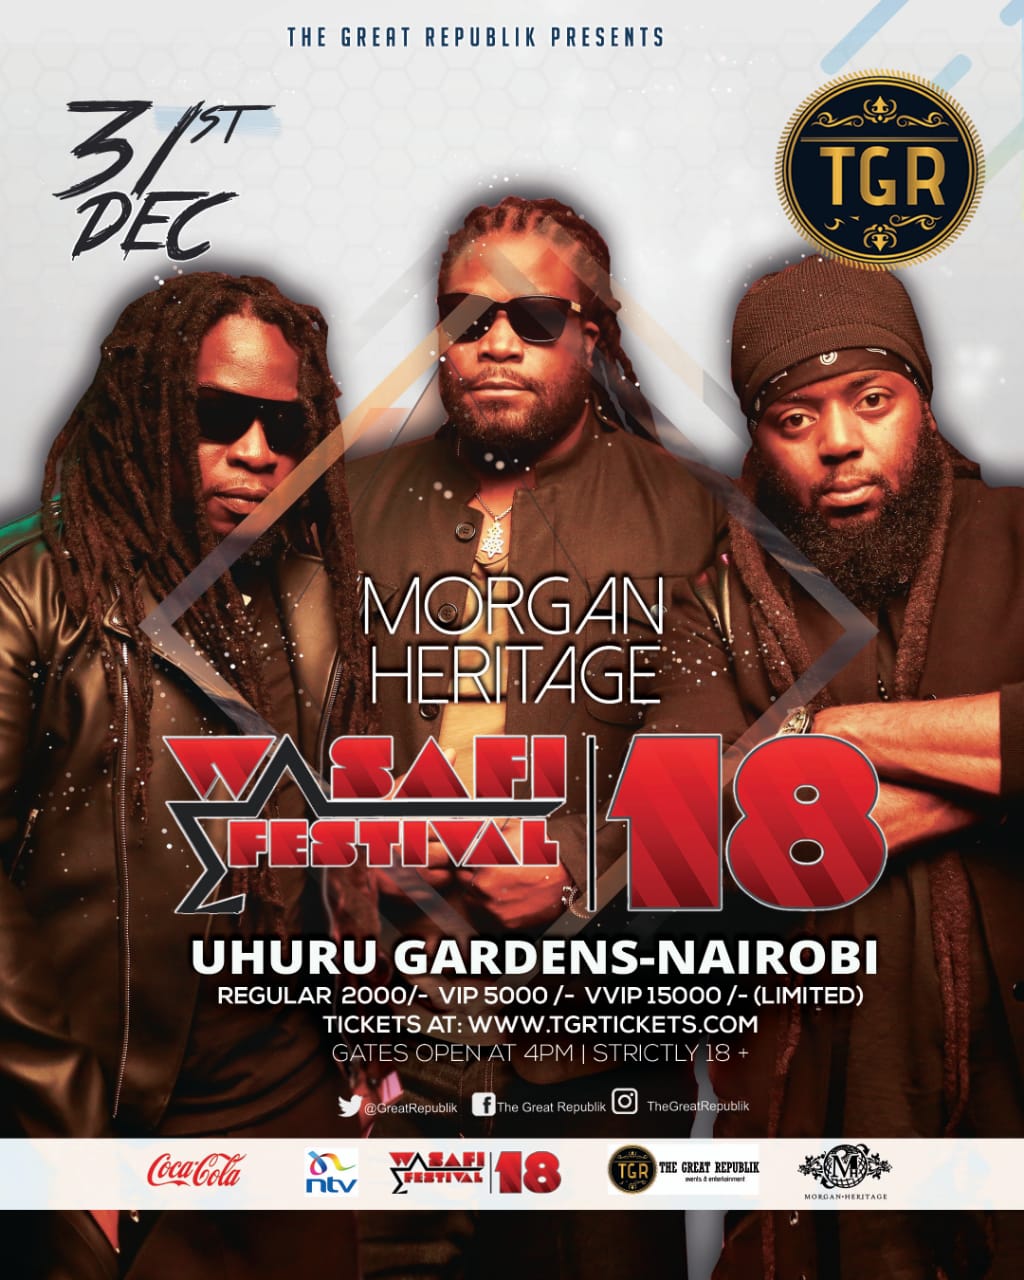 Morgan Heritage to perform at Wasafi Festival 2018 in Kenya on December 31st